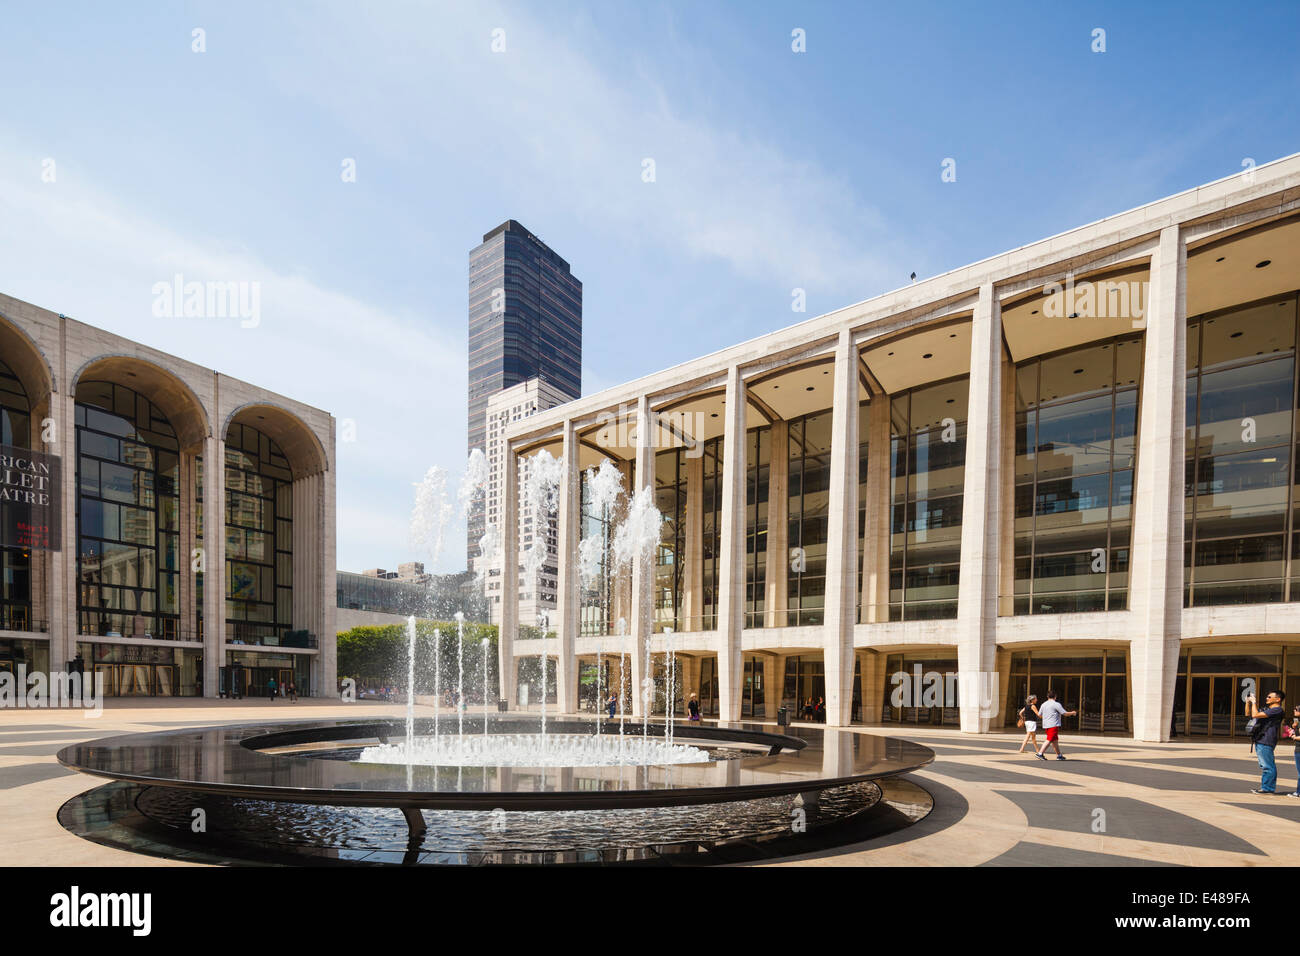 New York City - June 22: Lincoln Center and Metropolitan Opera House in New York on June 22, 2013 Stock Photo